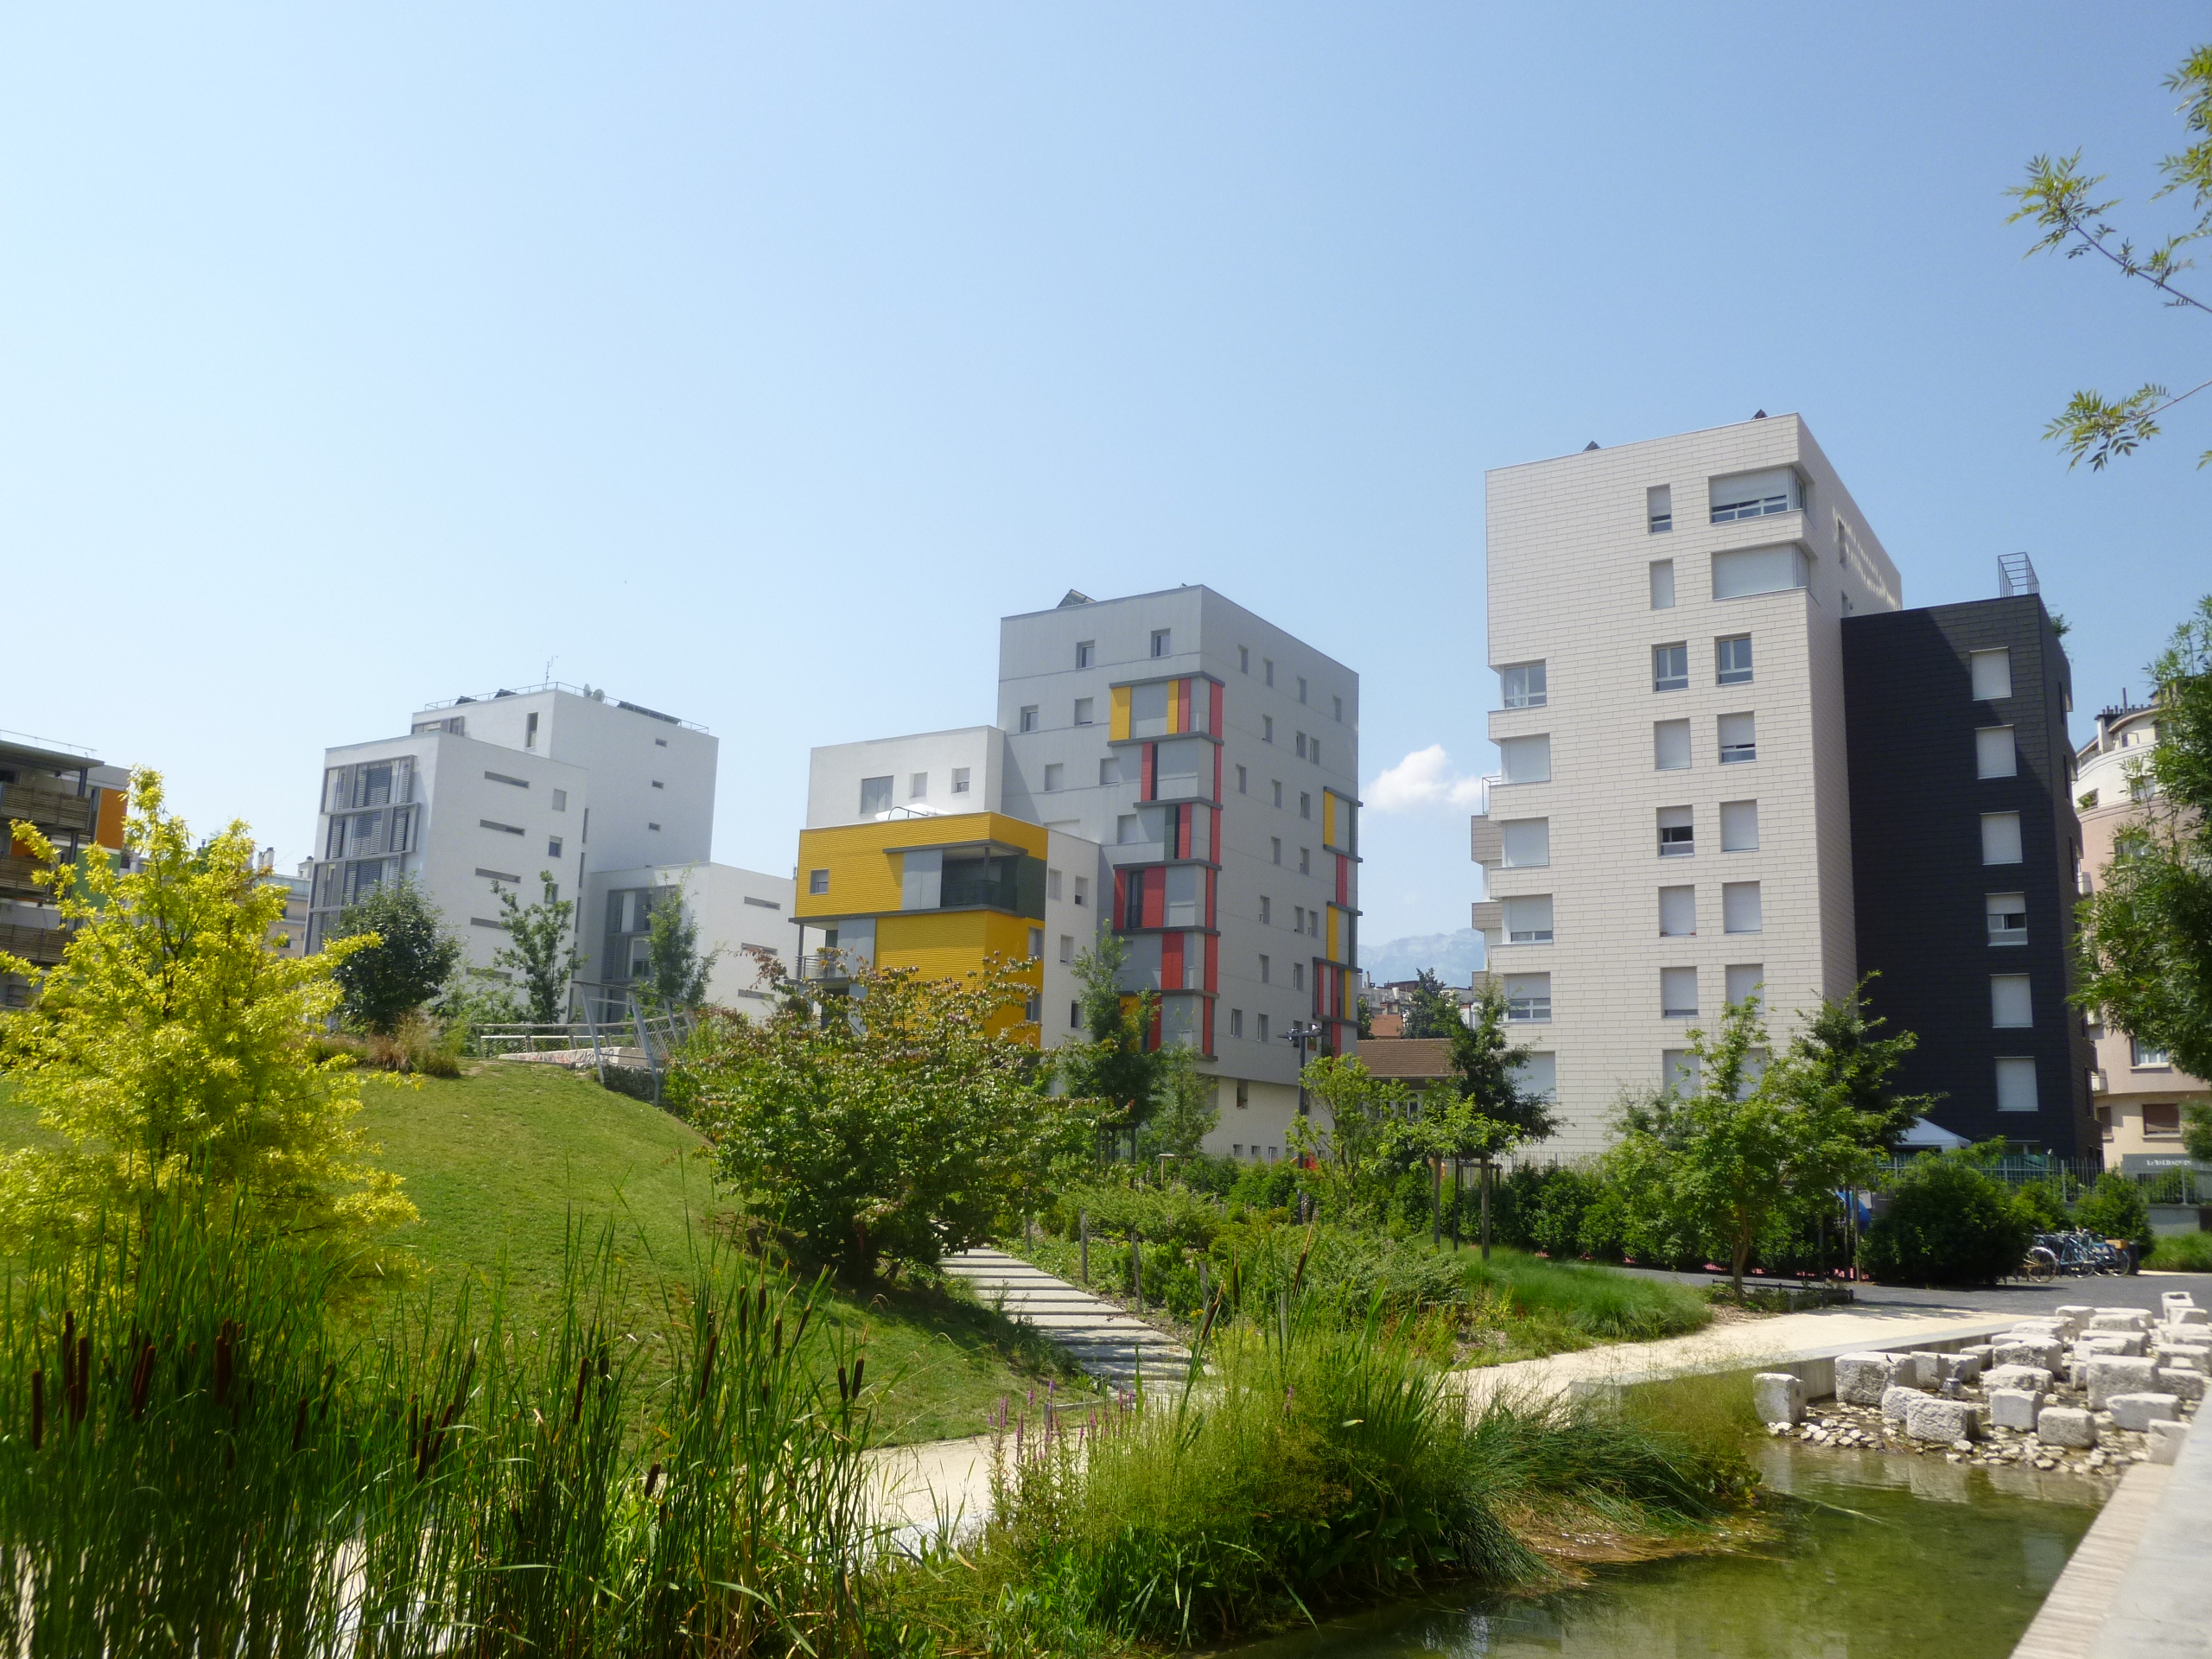 Energy efficiency assessment in an eco-district